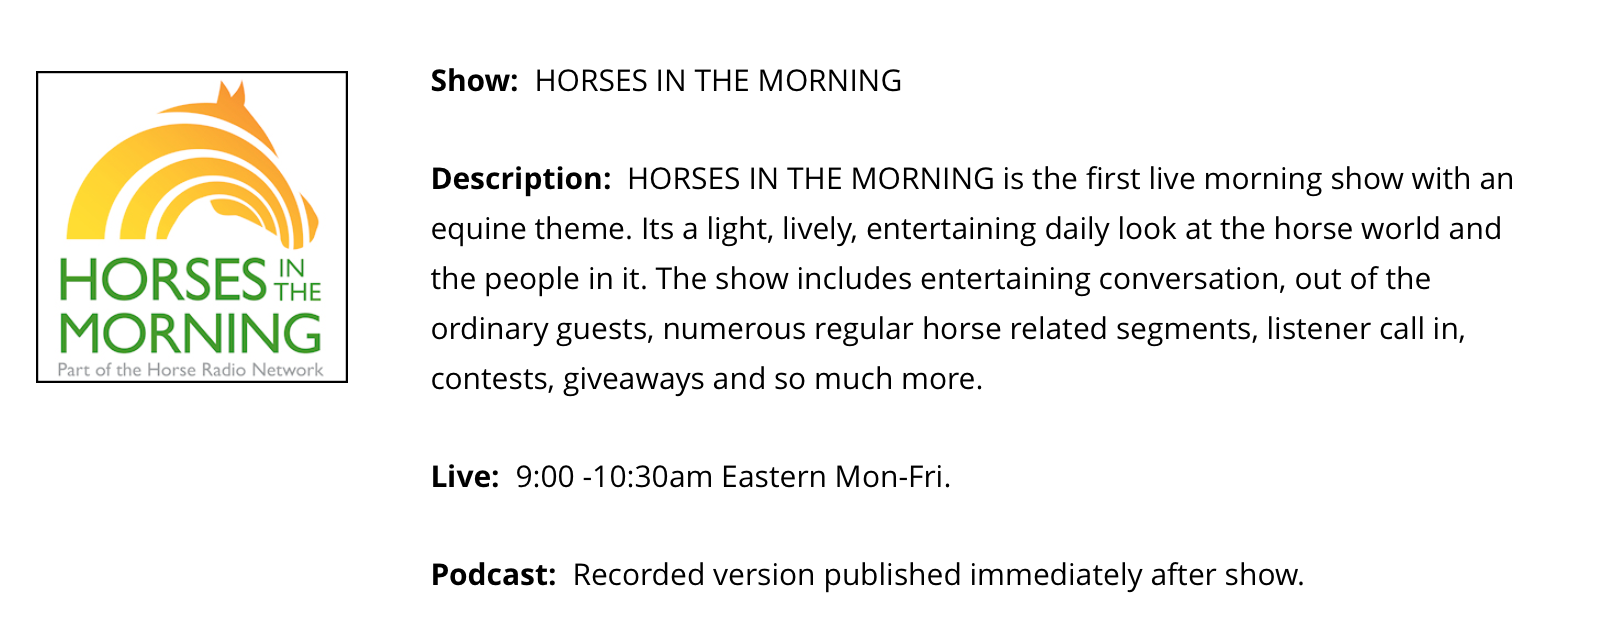 Horses in the Morning on Horse Radio Network